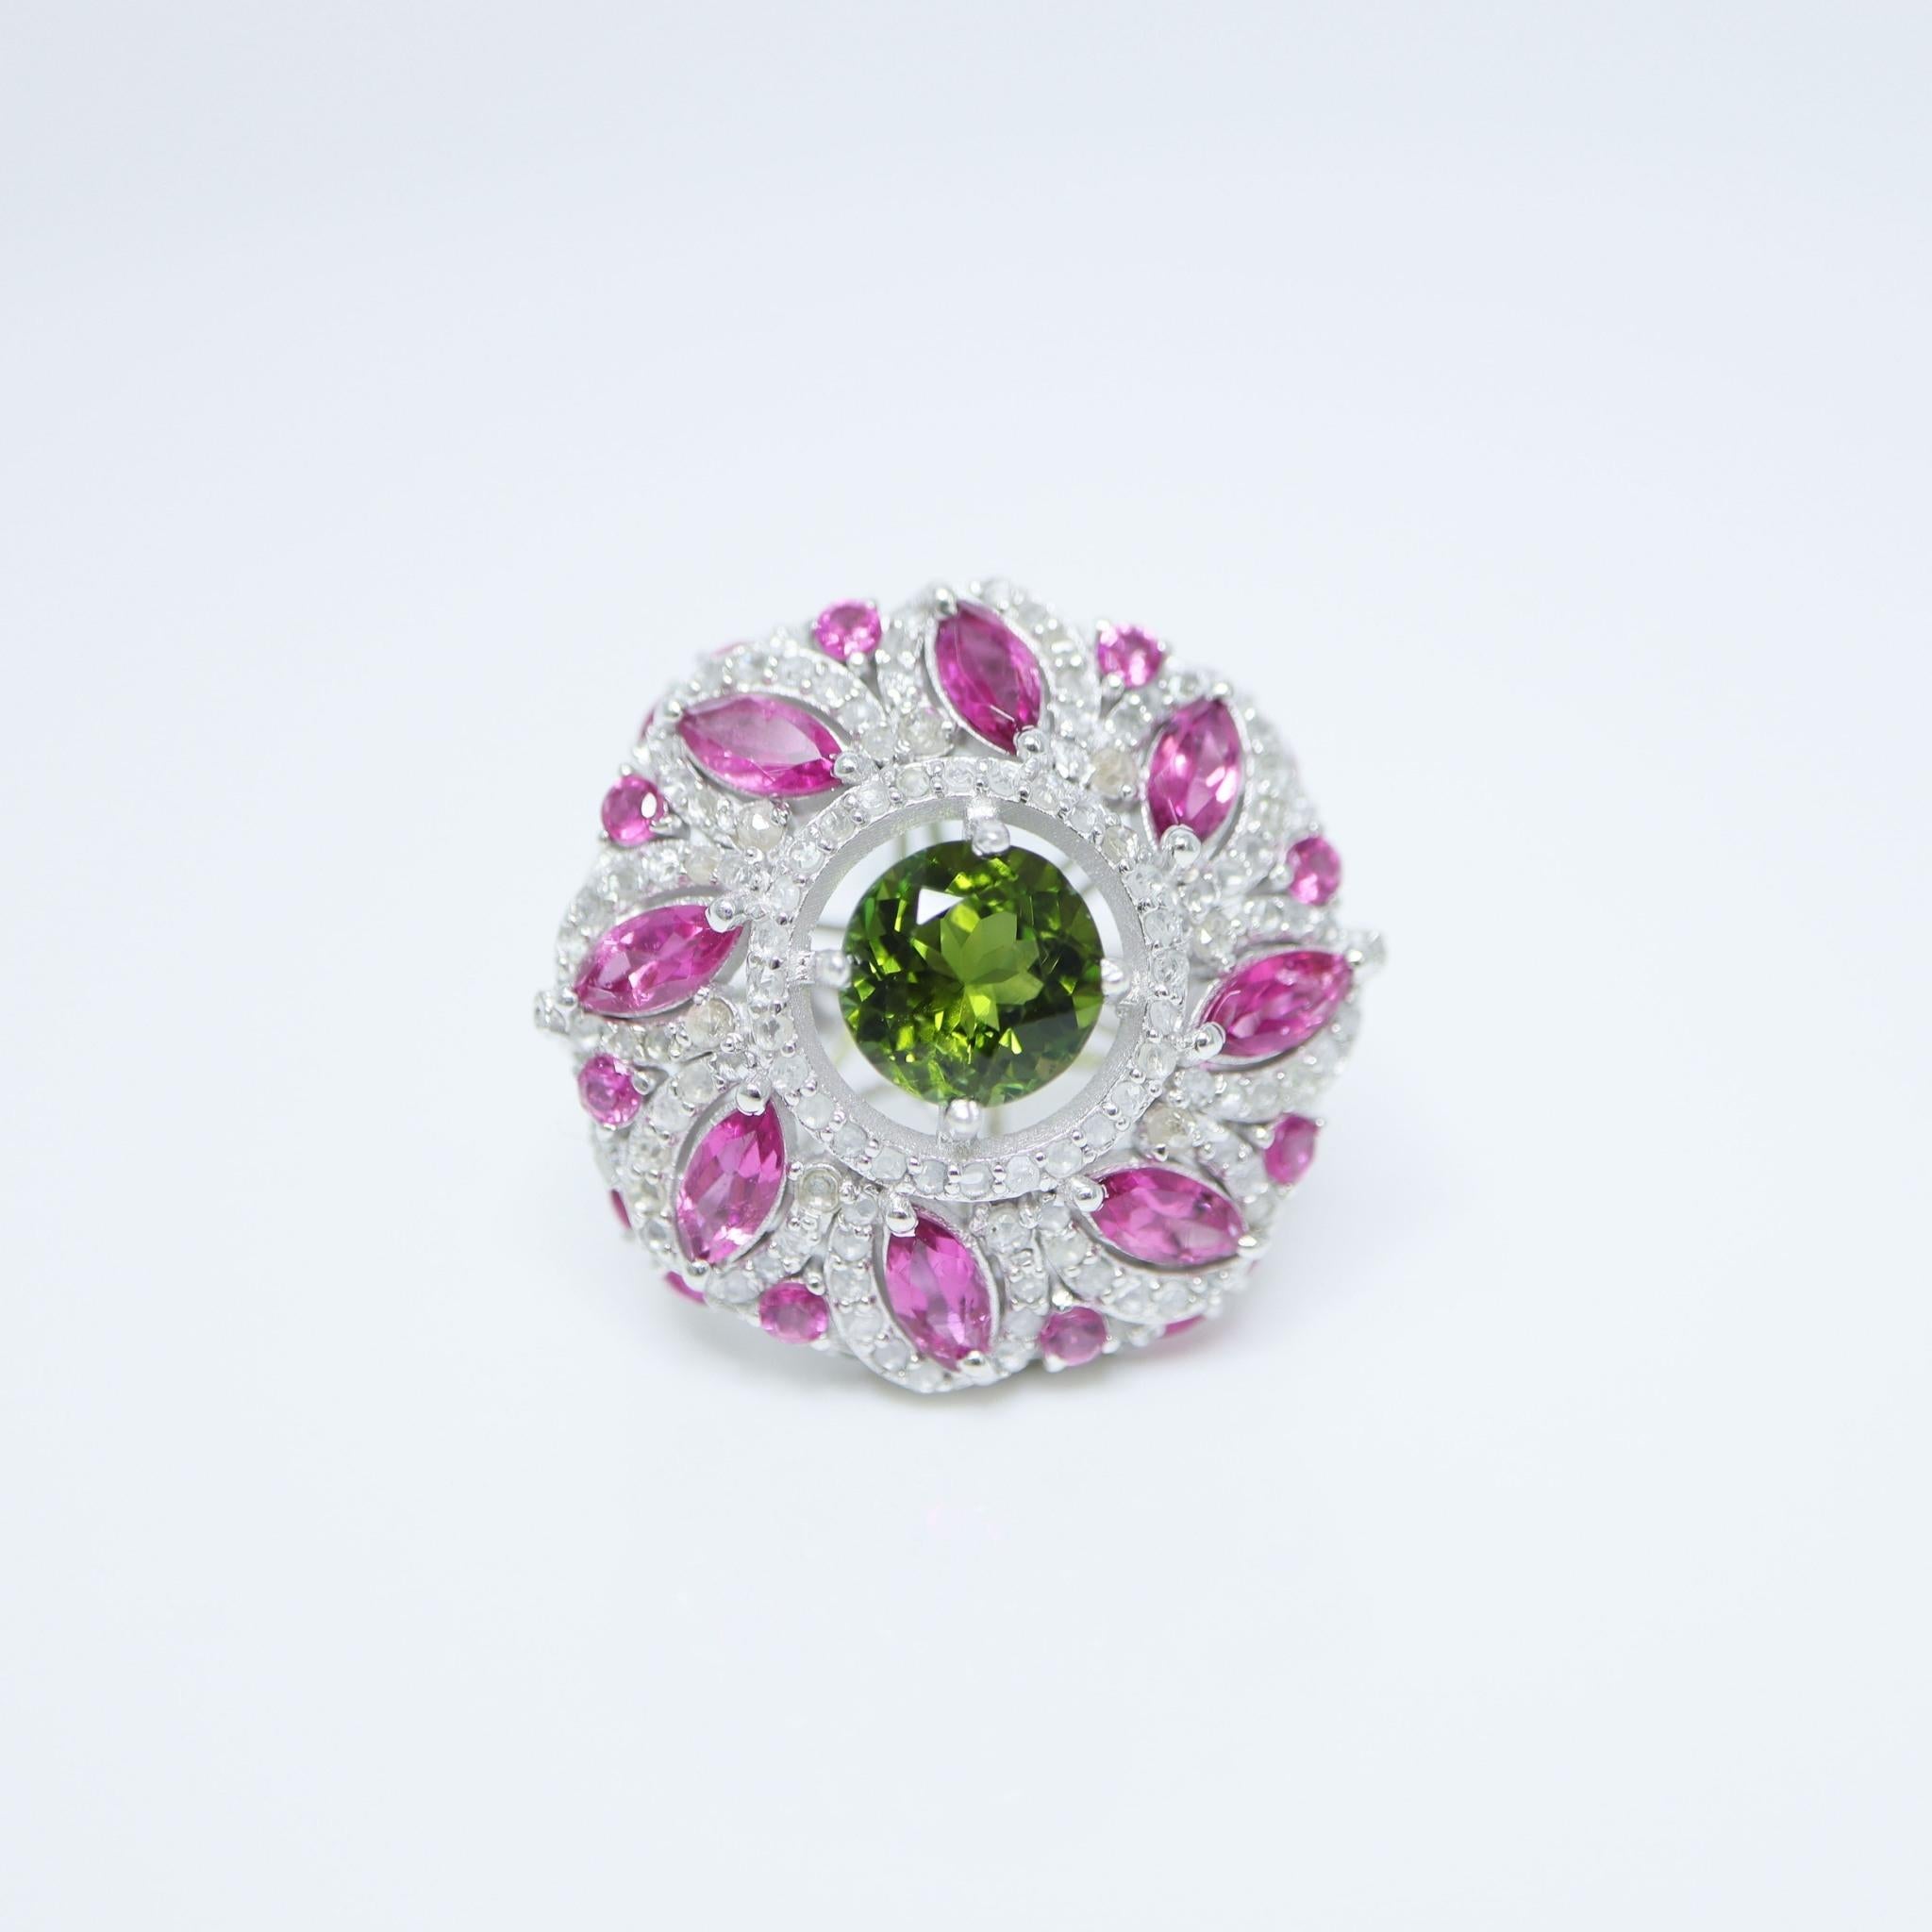 *Silver 4.53 ctw  Natural Tourmaline Diamonds Antique Engagement Ring*
This ring features a 2.00-carat natural green tourmaline set on a silver band and accented with natural HI SI diamonds weighing 1.29 carats and natural rubylite weighing 2.53 ct.